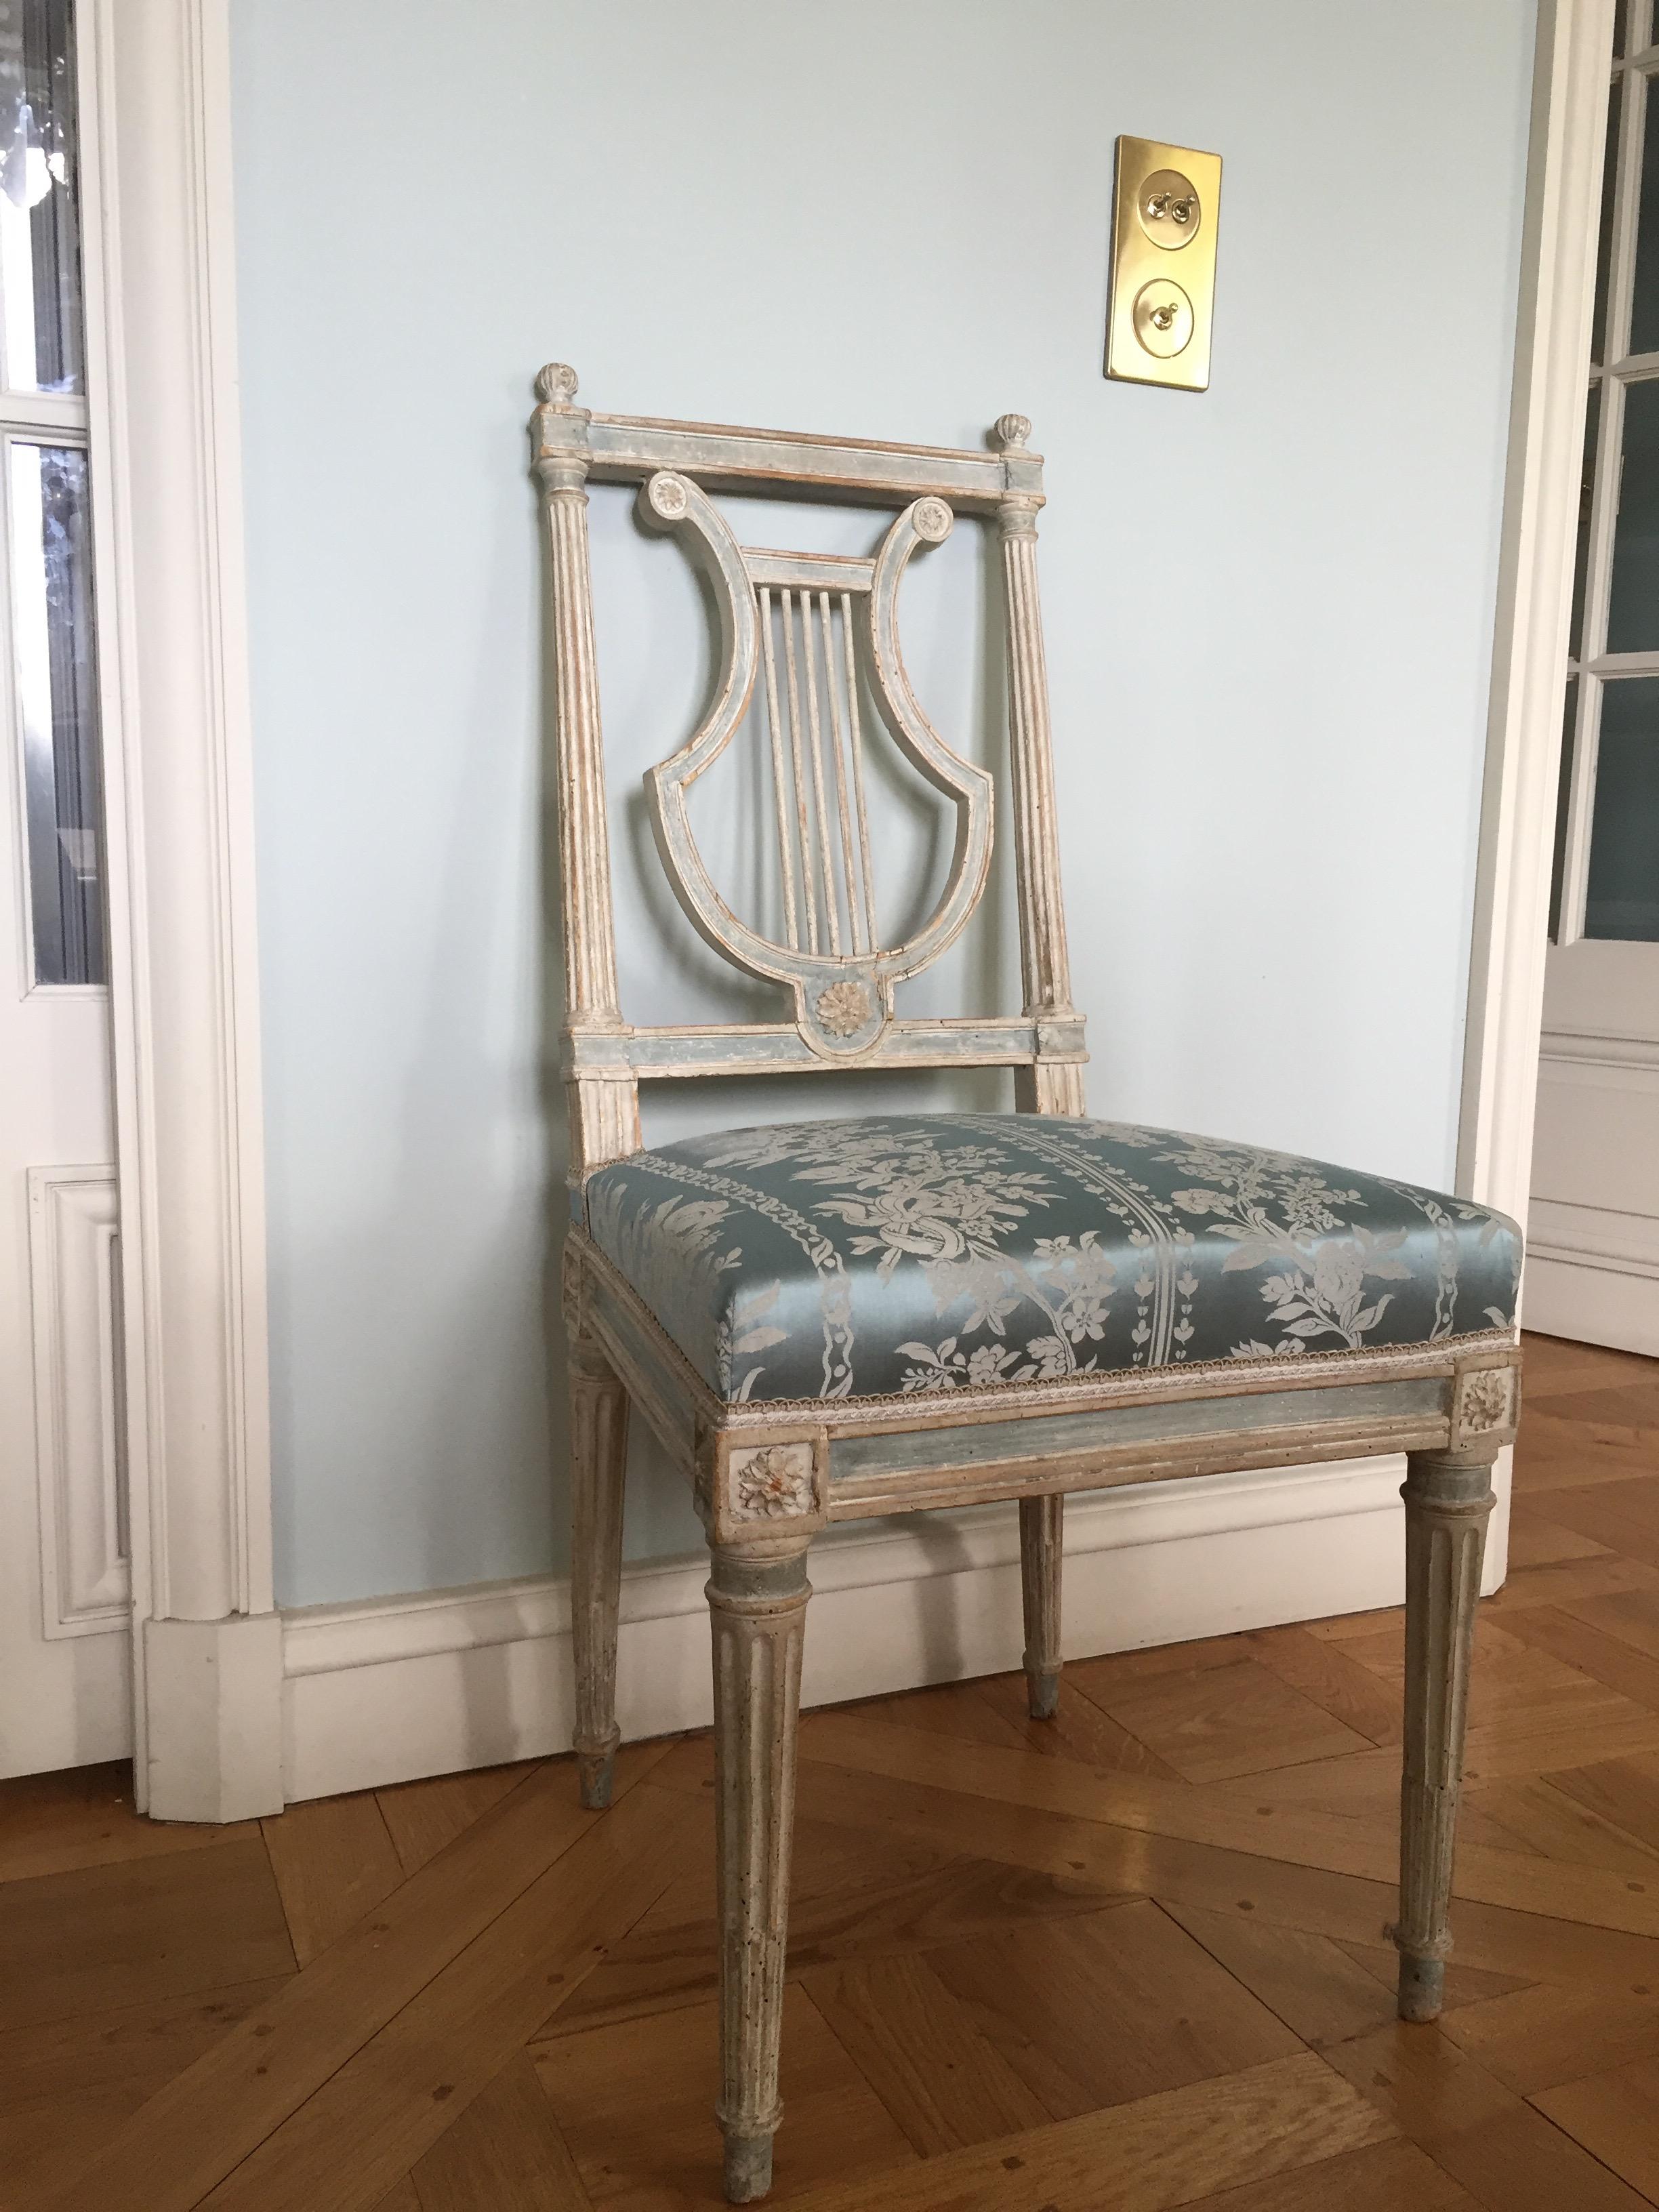 Set of Original Jacob Model Chairs Lyre of Louis XVI, Late 18th Century, France For Sale 2